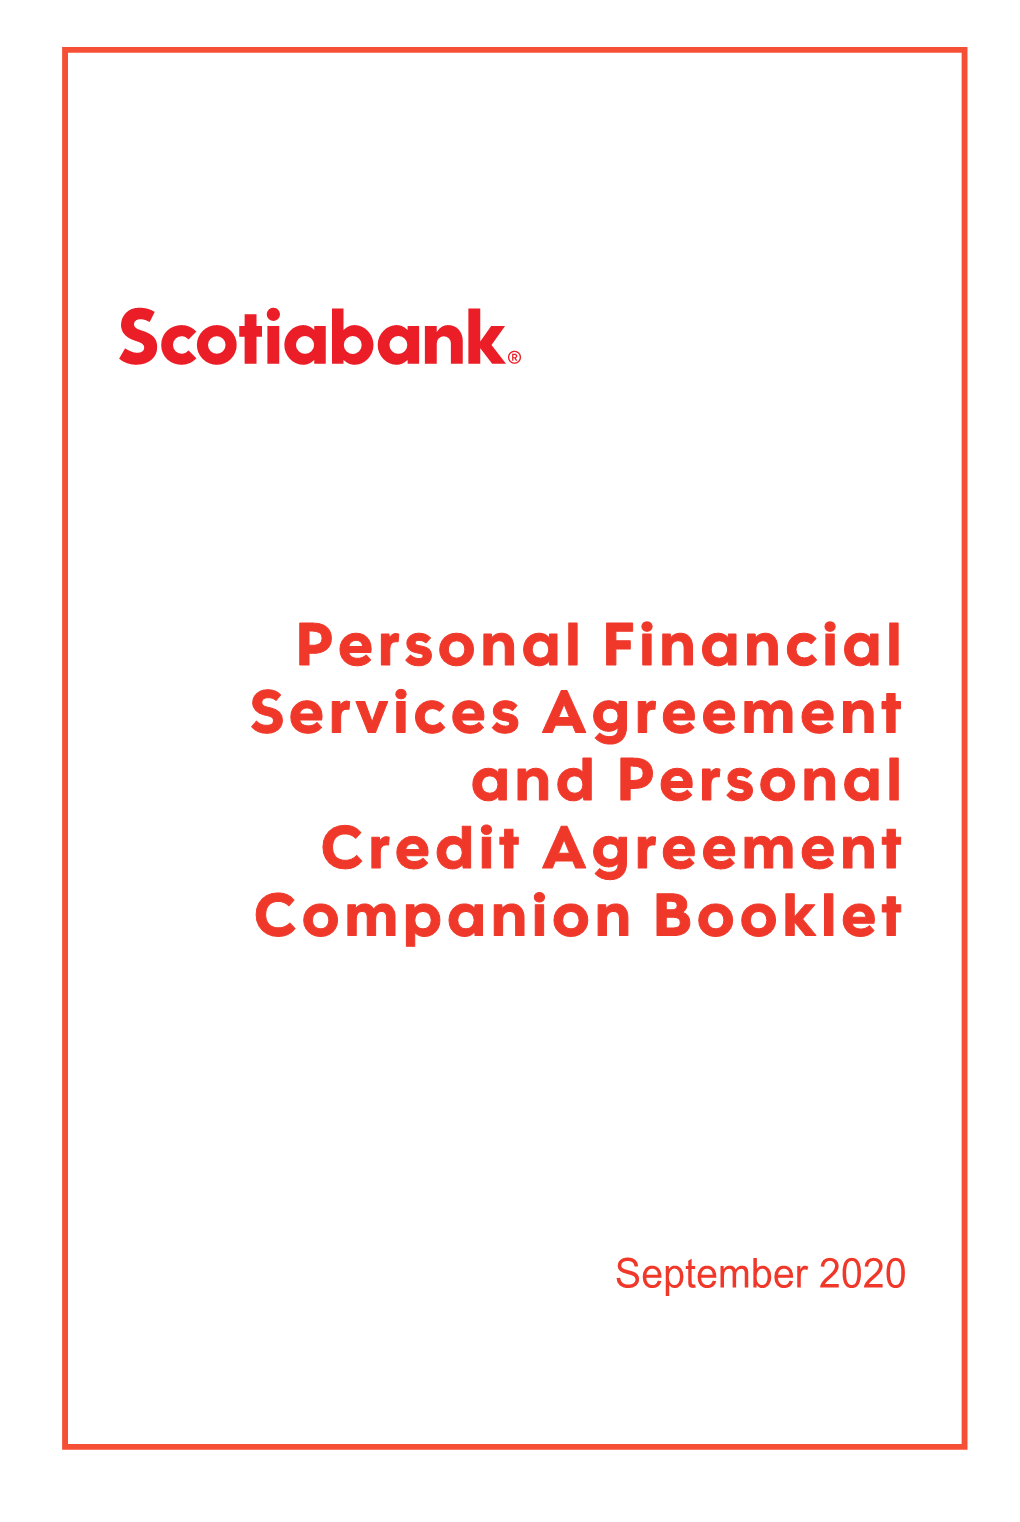 Personal Financial Services Agreement and Personal Credit Agreement Companion Booklet